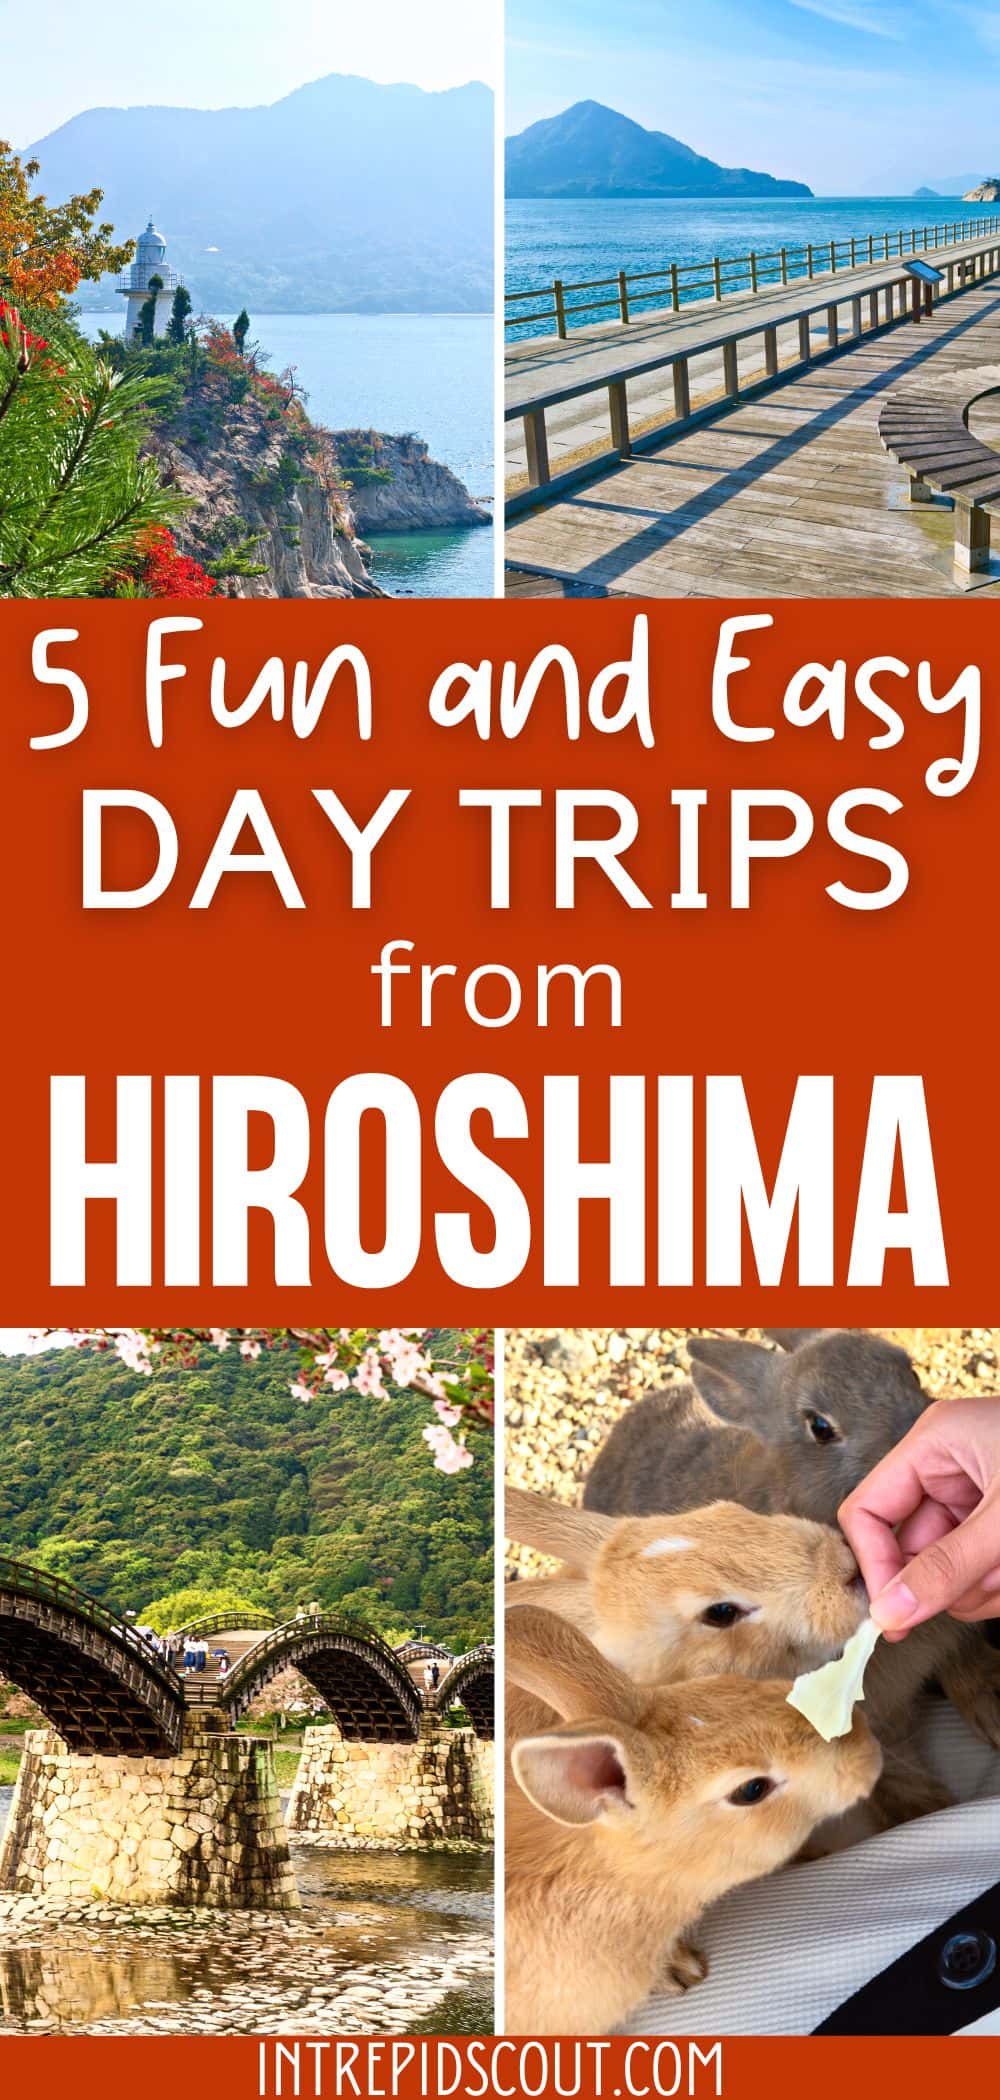 Day Trips from Hiroshima